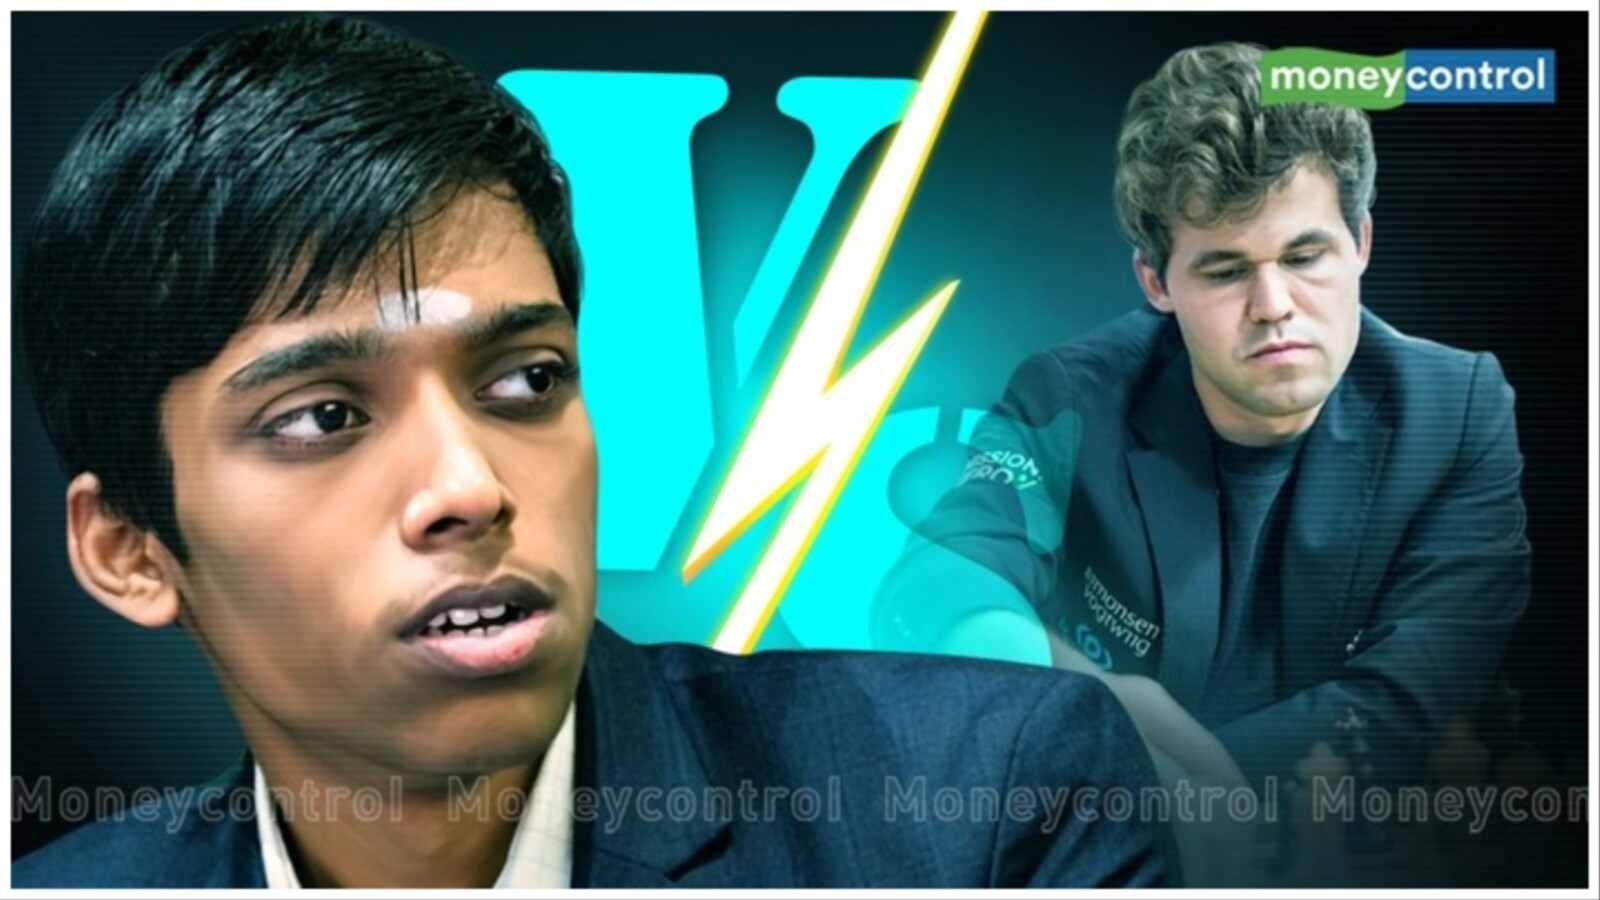 Chess: India's R Praggnanandhaa and World No 1 Magnus Carlsen to play tie- breaker set of World Cup final